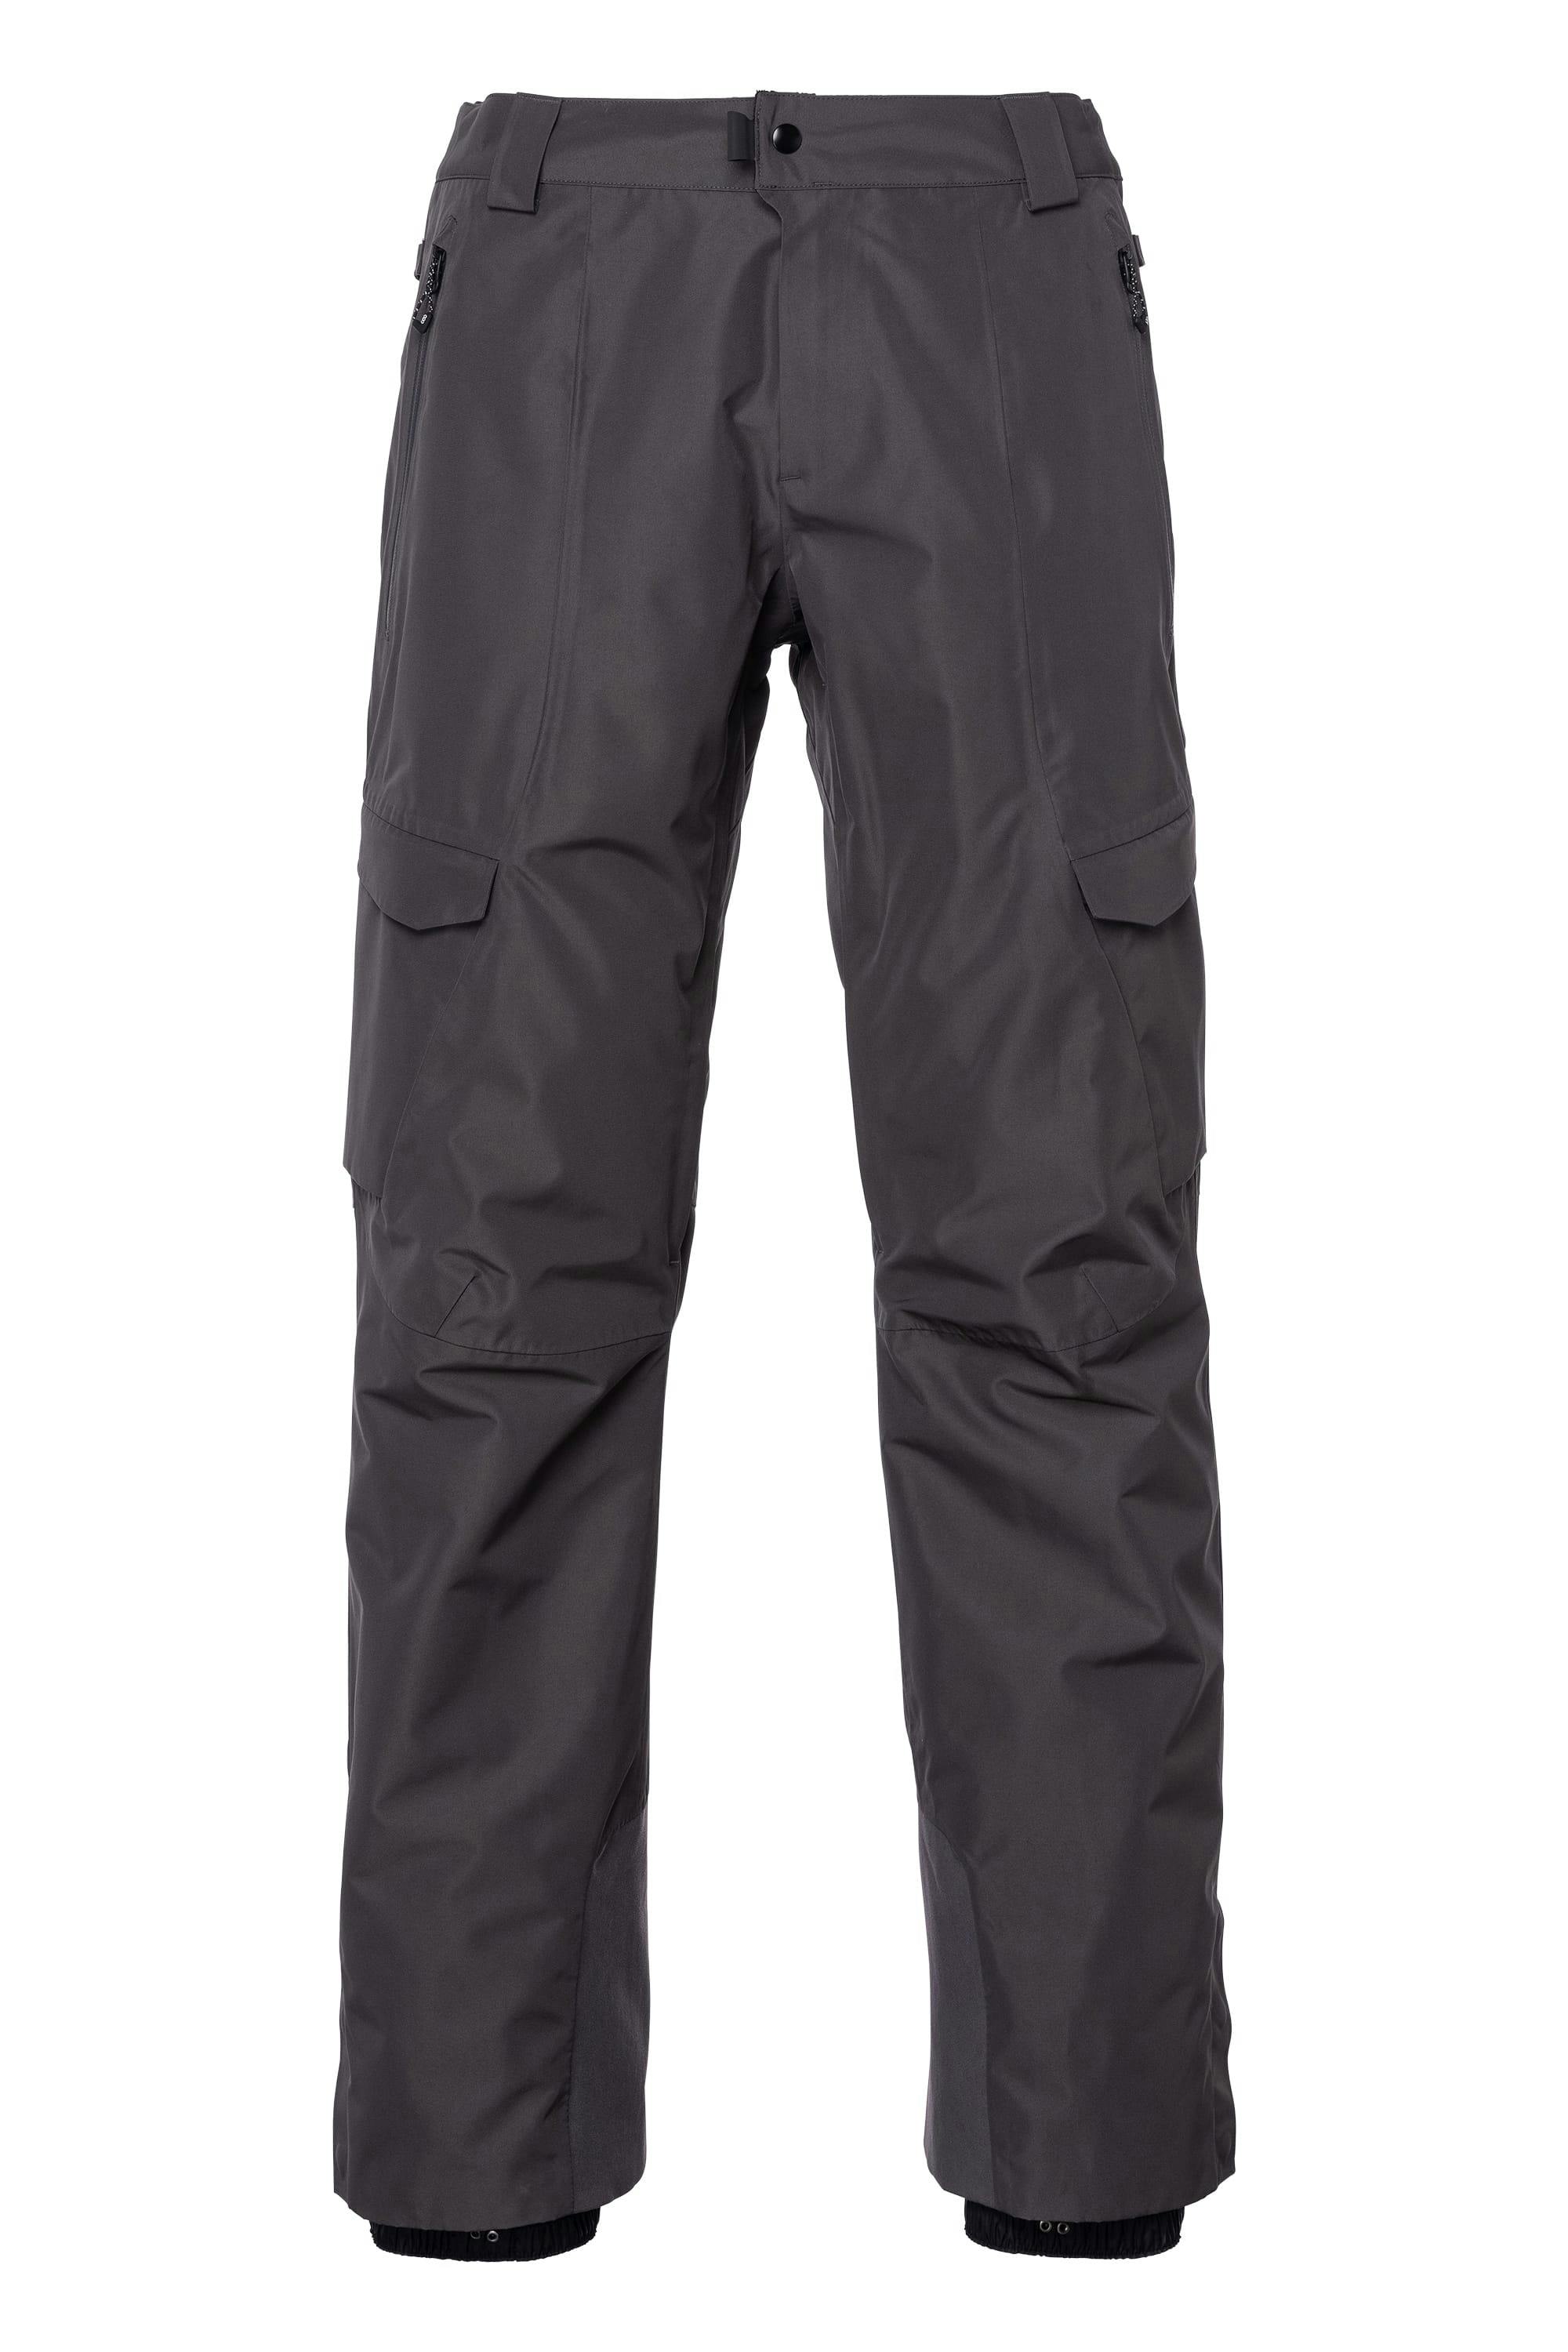 686 Men's Quantum Thermagraph 2L Insulated Pant